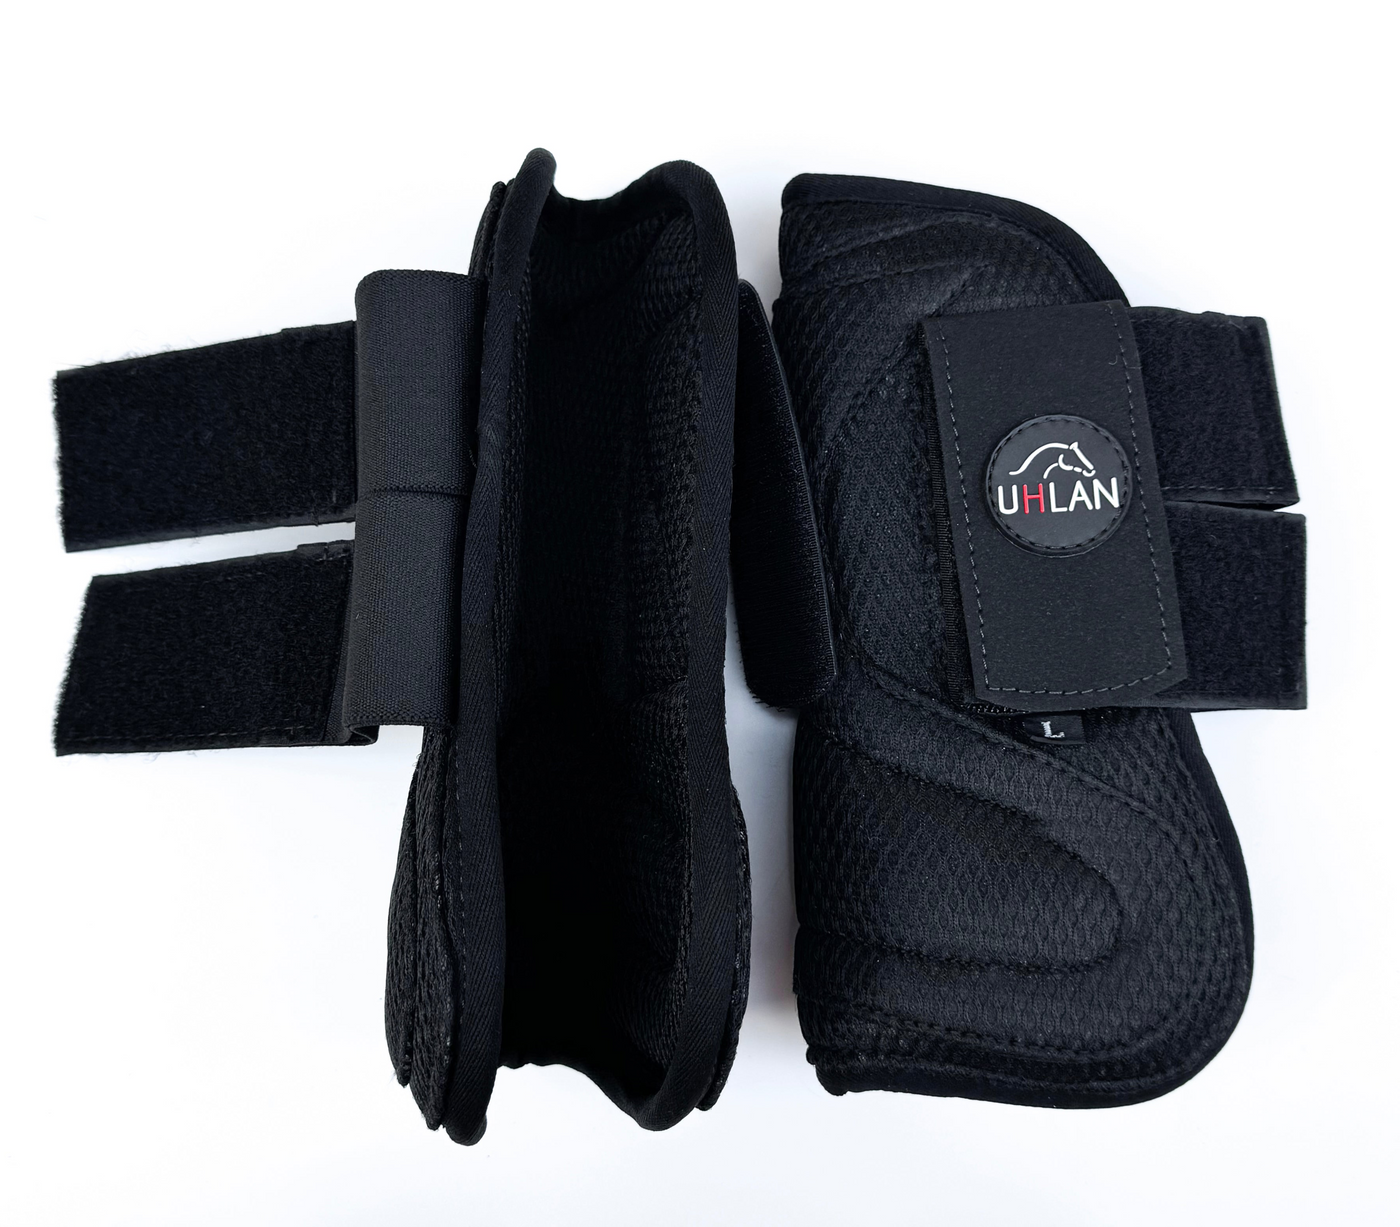 SAMPLE Airflow Tendon Boots - Size Full